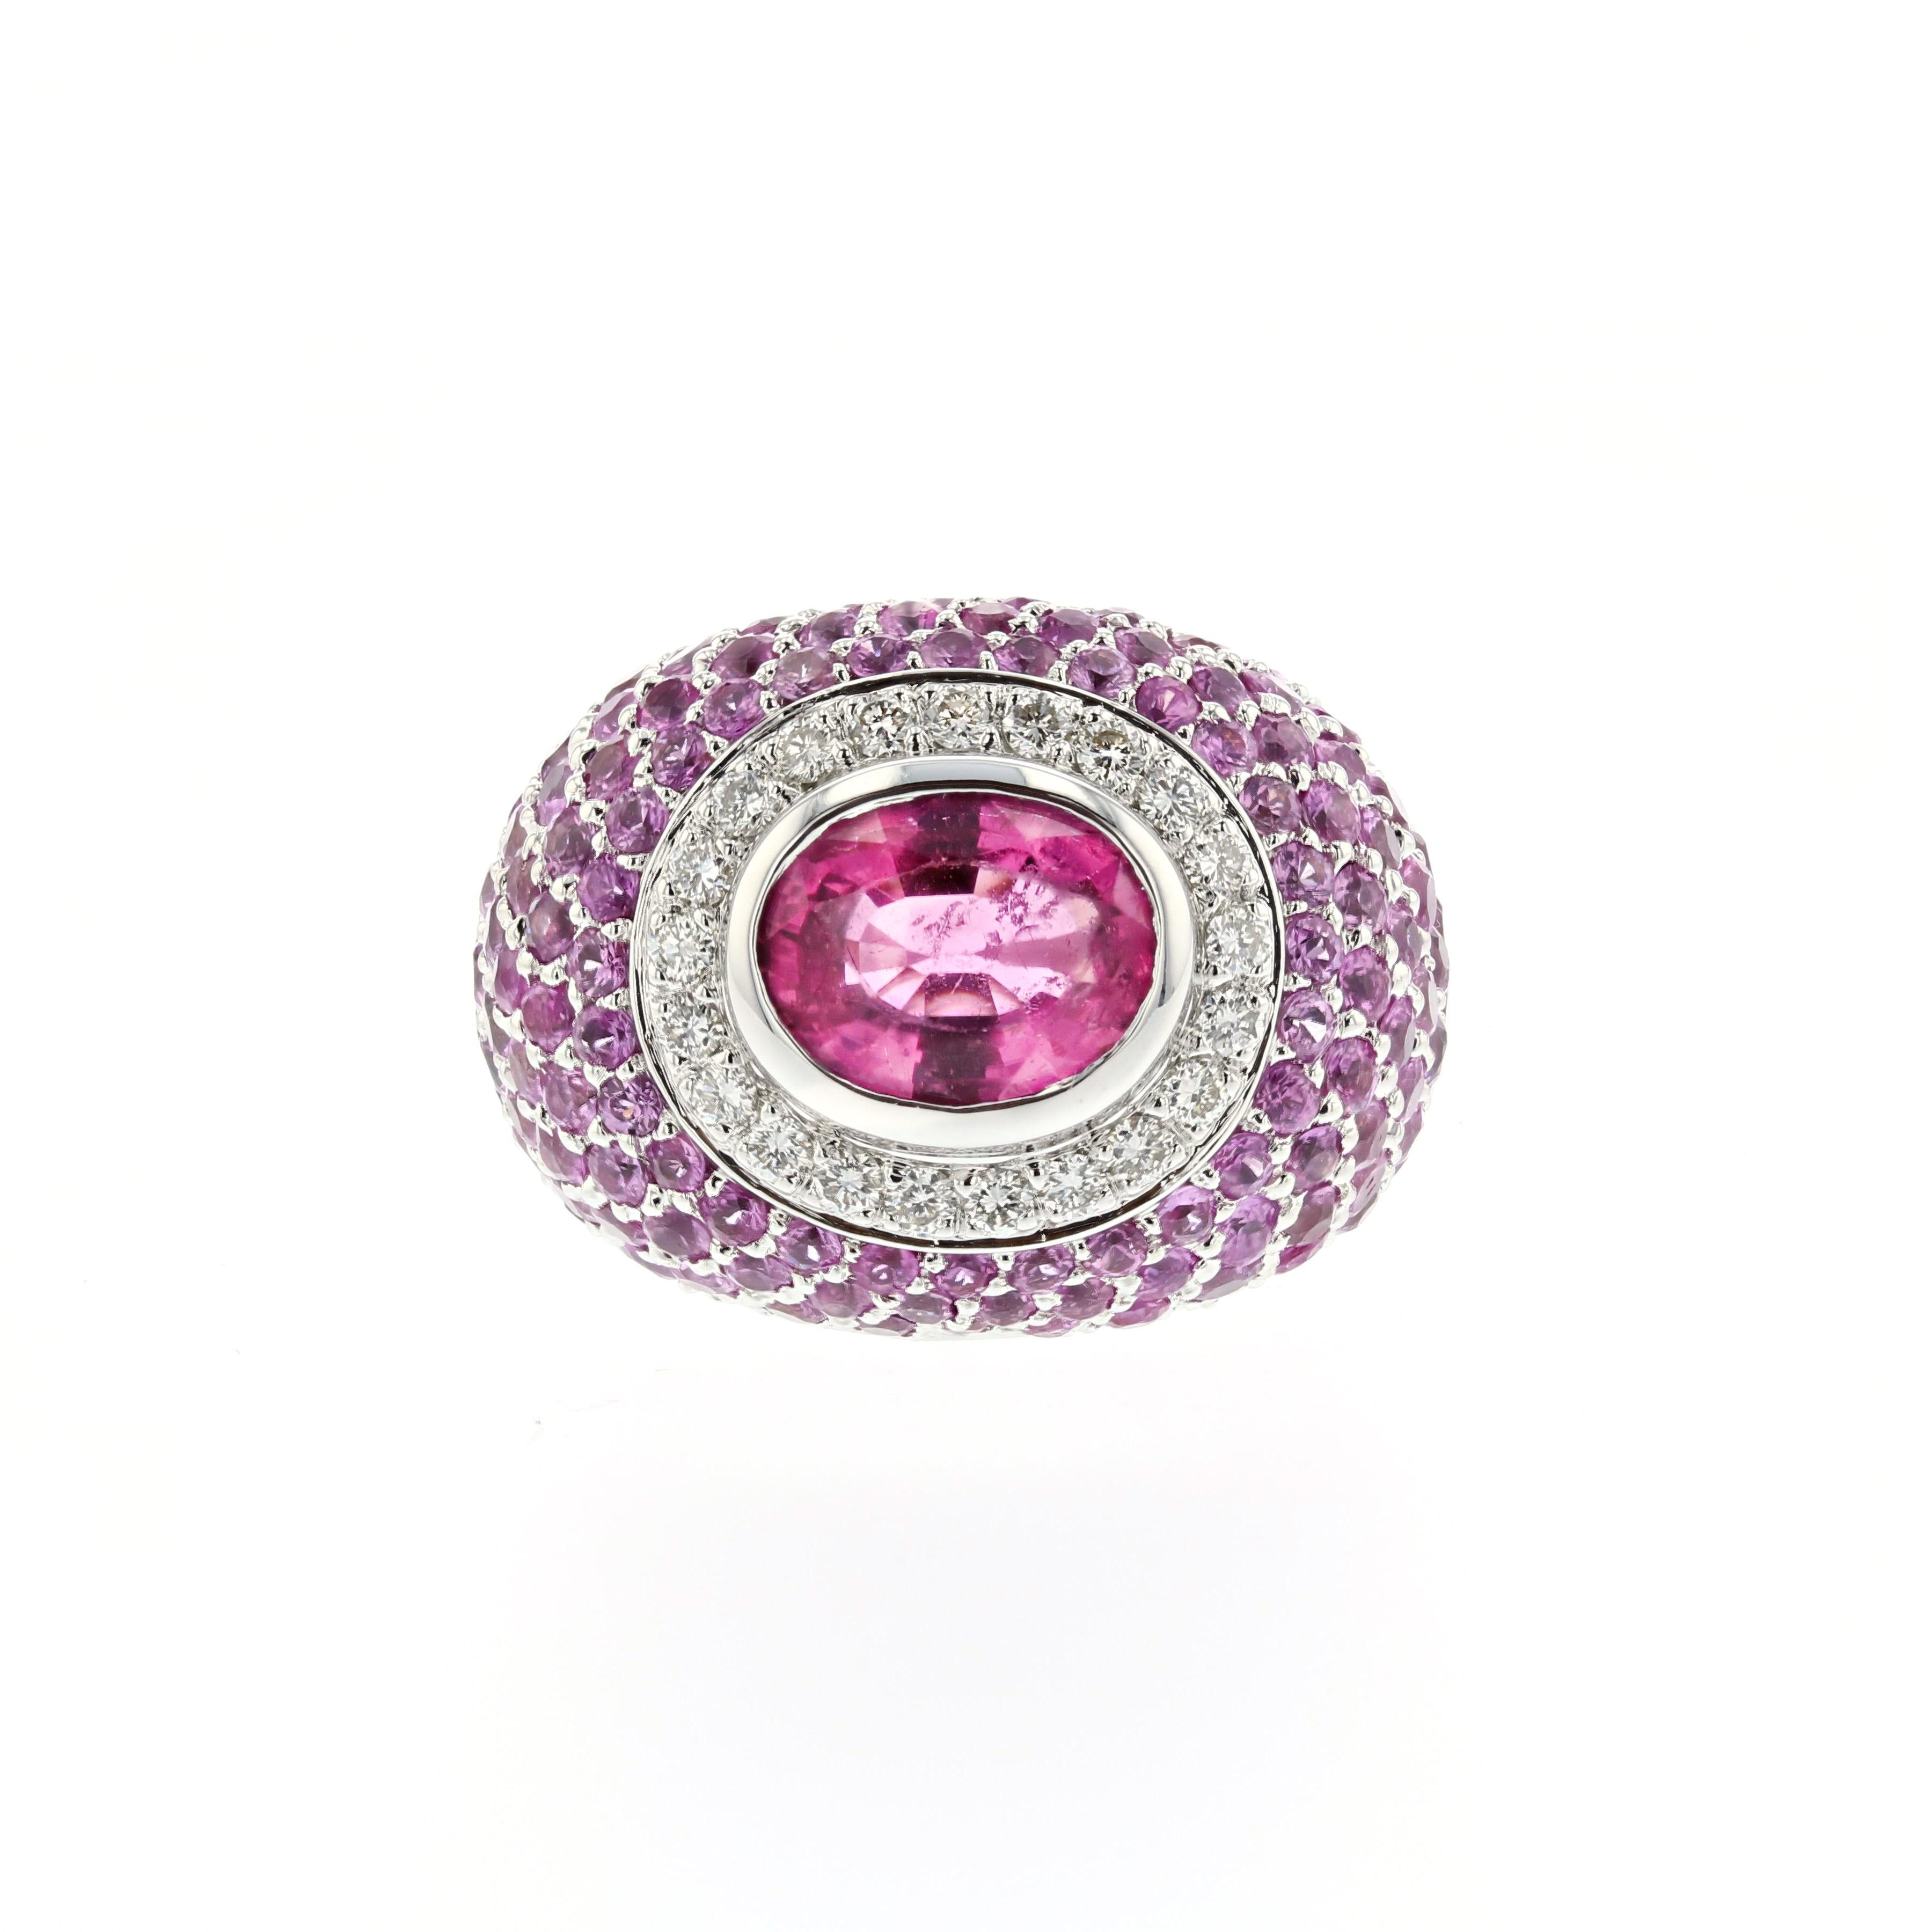 18K white gold ring featuring a 1.55 carat pink tourmaline cabochon with a diamond halo design and round pink tourmalines pavé in a dome design.  Accent pink tourmalines total 3 carats and round brilliant diamonds total 0.40 carats, G color and VS